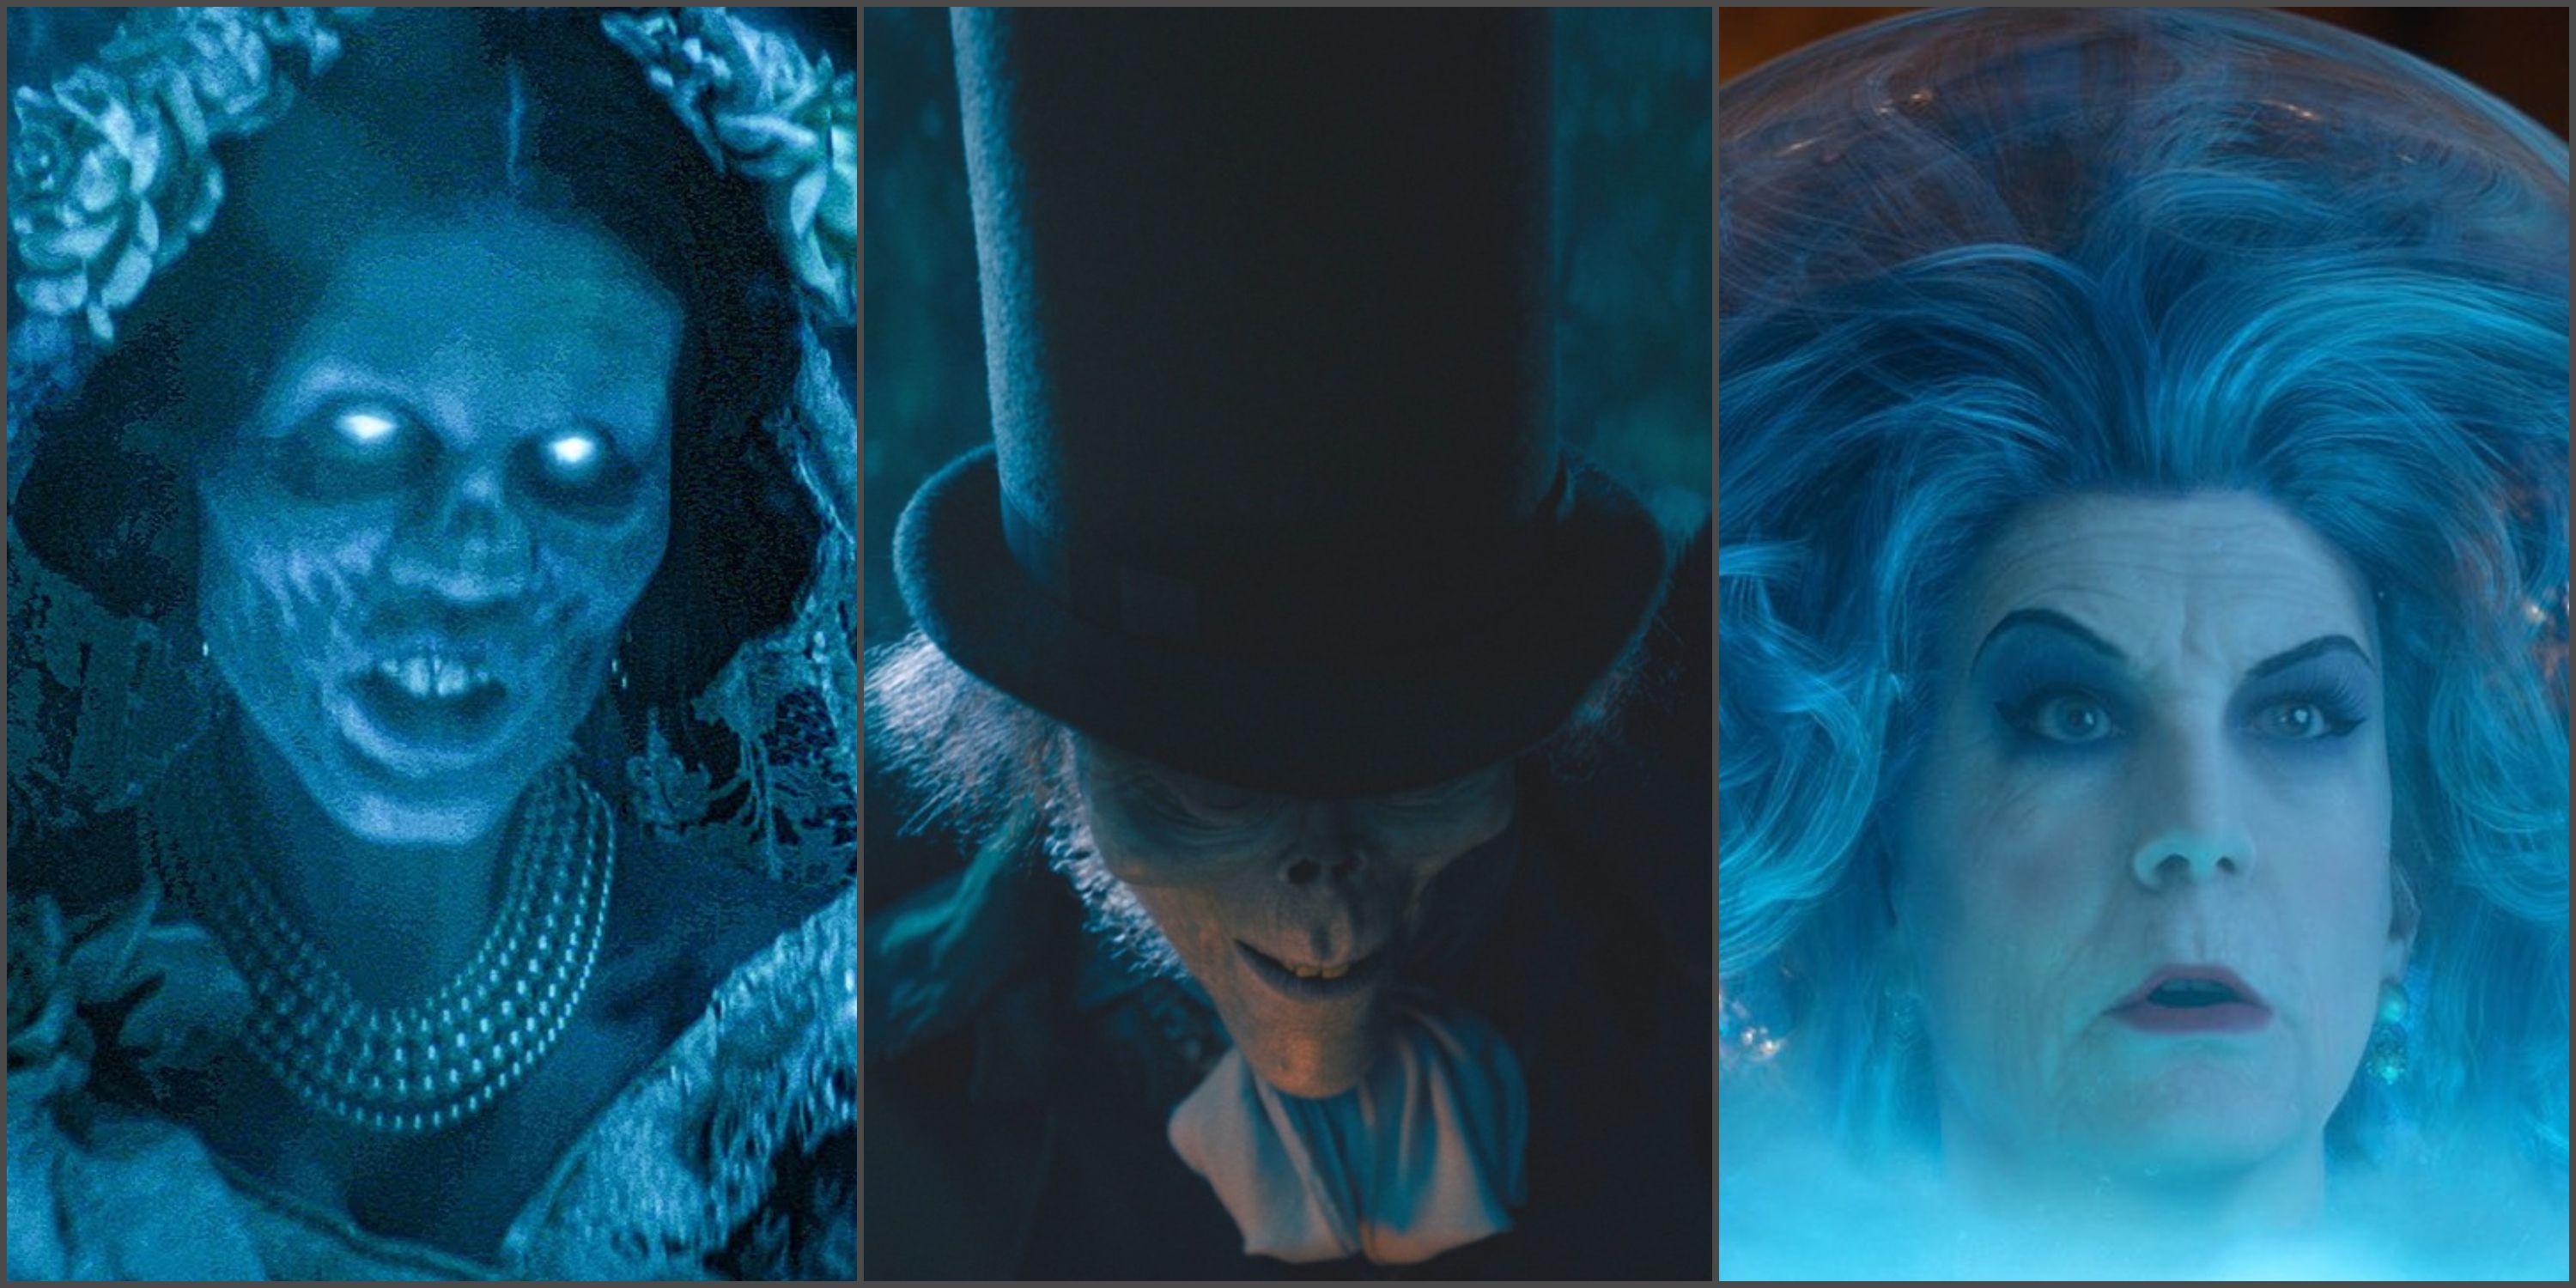 The Haunted Mansion: Constance Hatchaway, the Hatbox Ghost, and Madam Leota